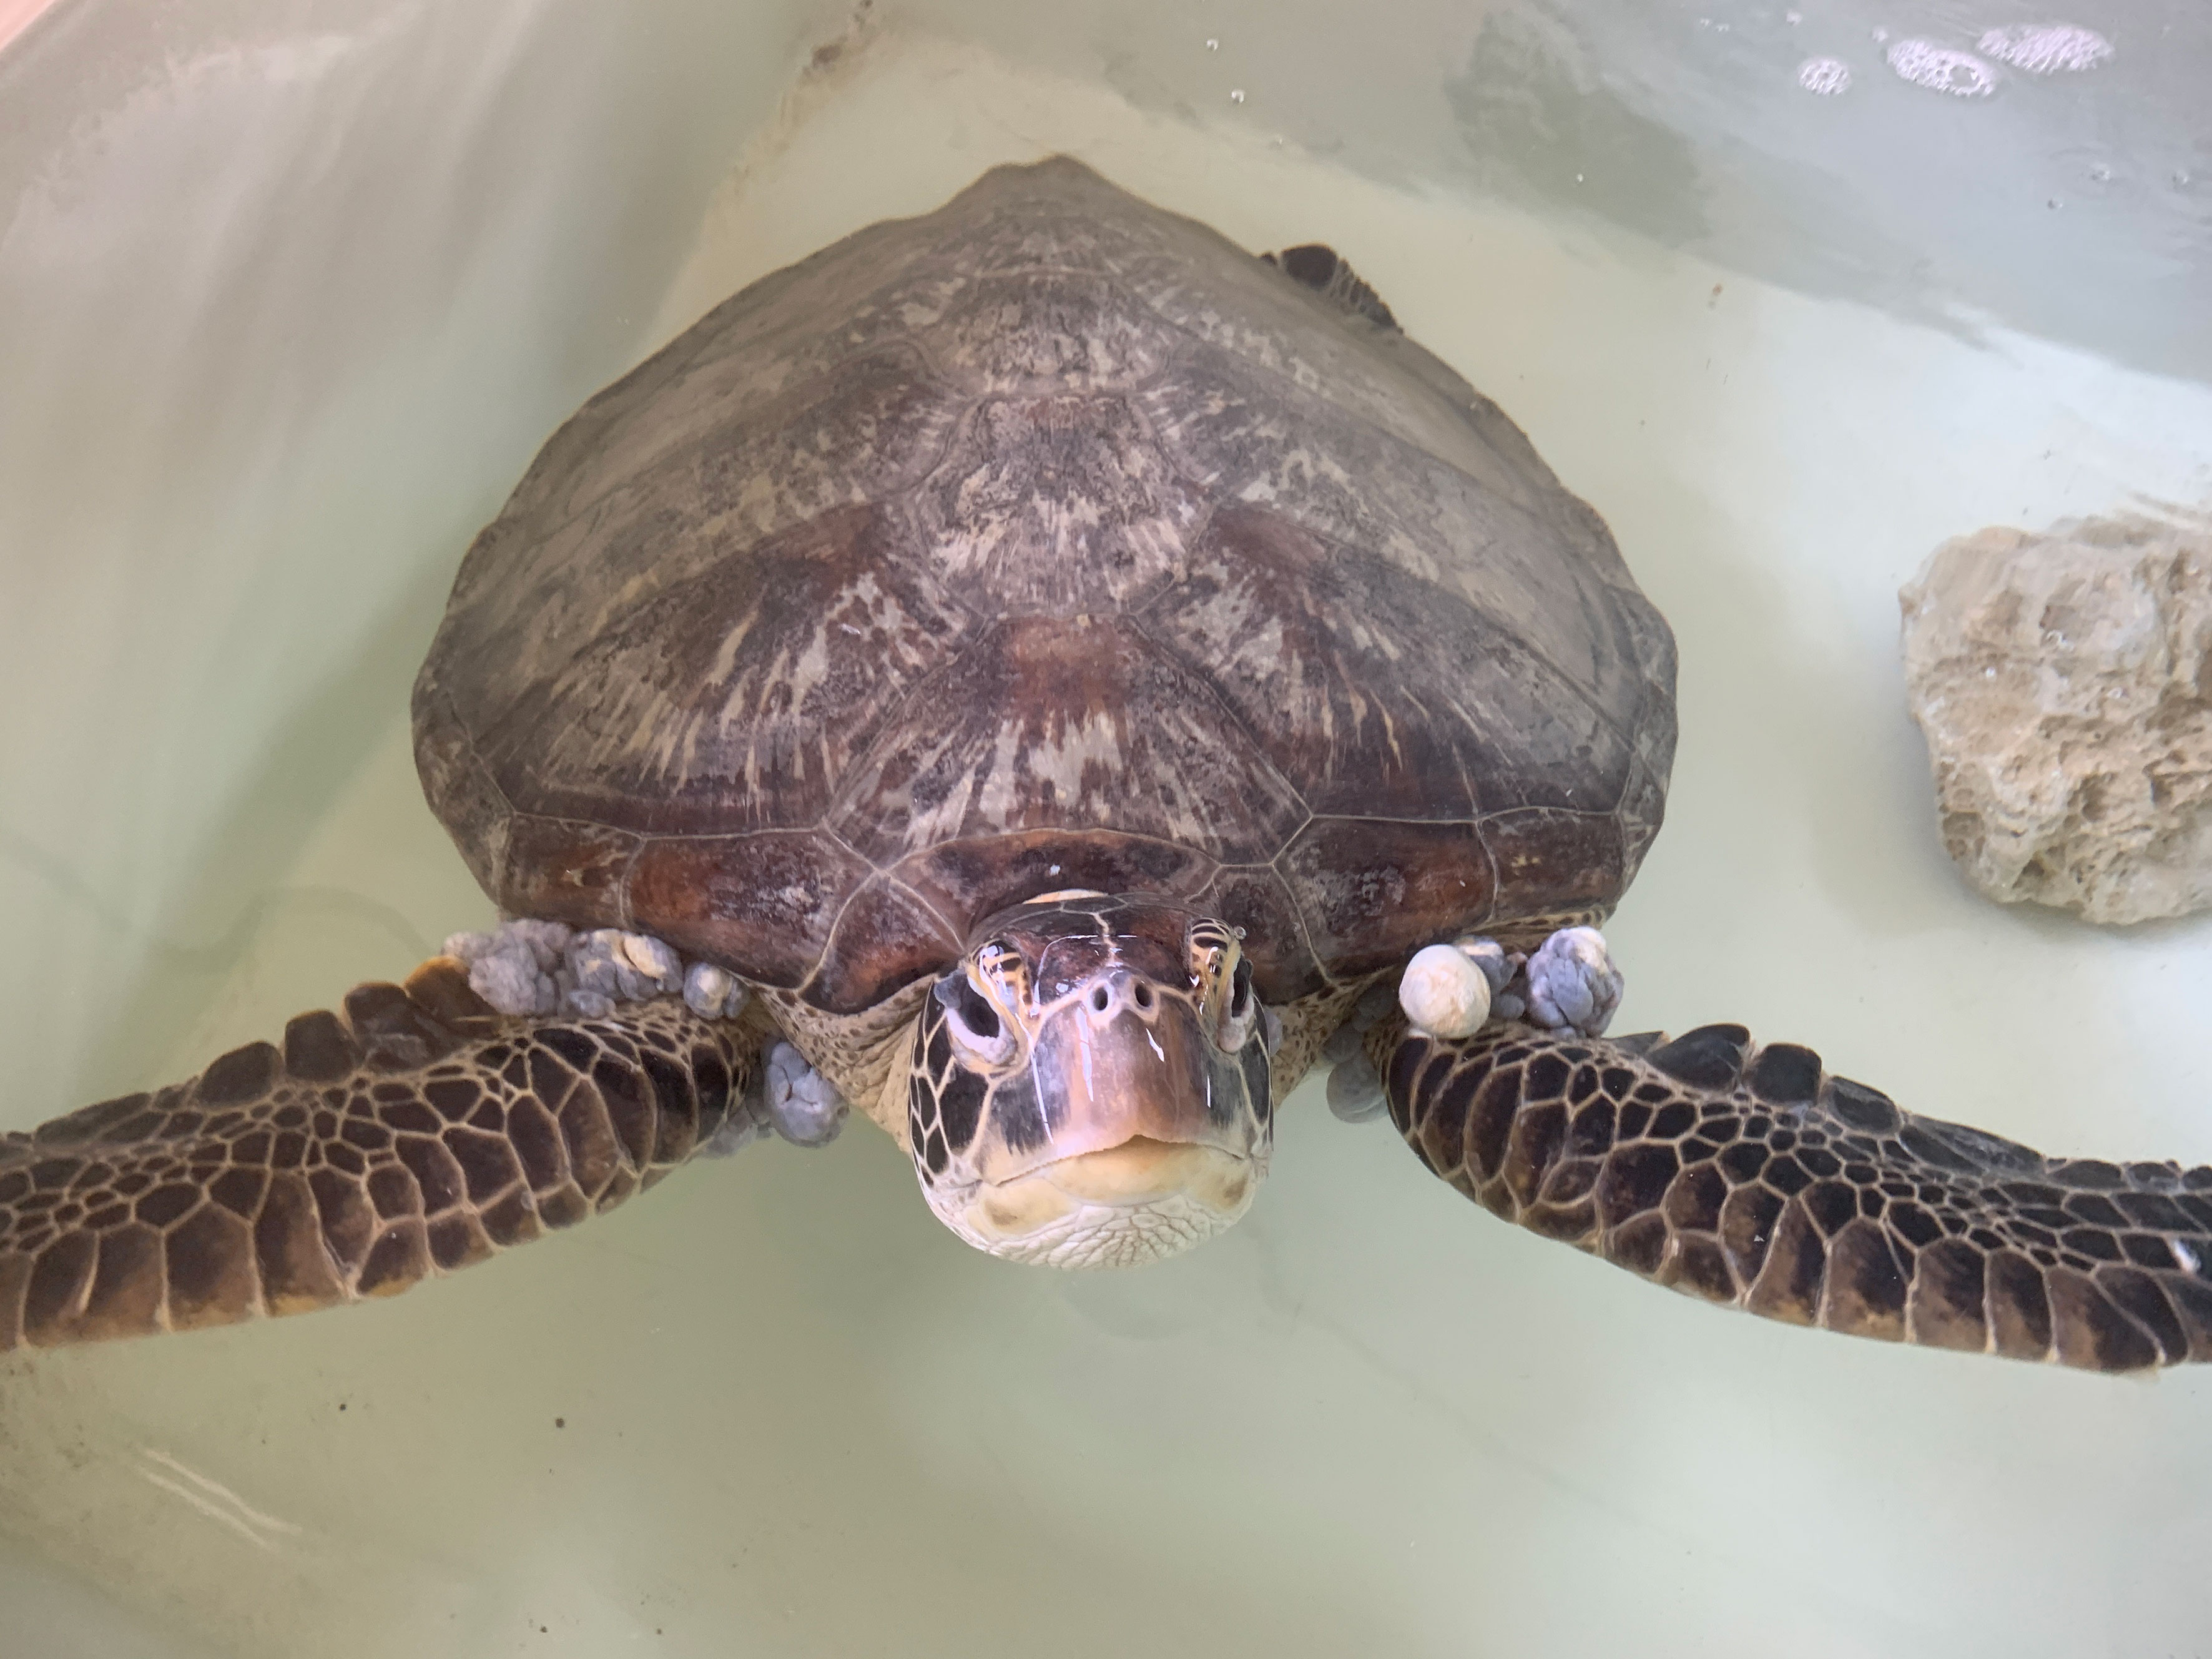 Zoo takes in 10 tiny turtles at conservation lab